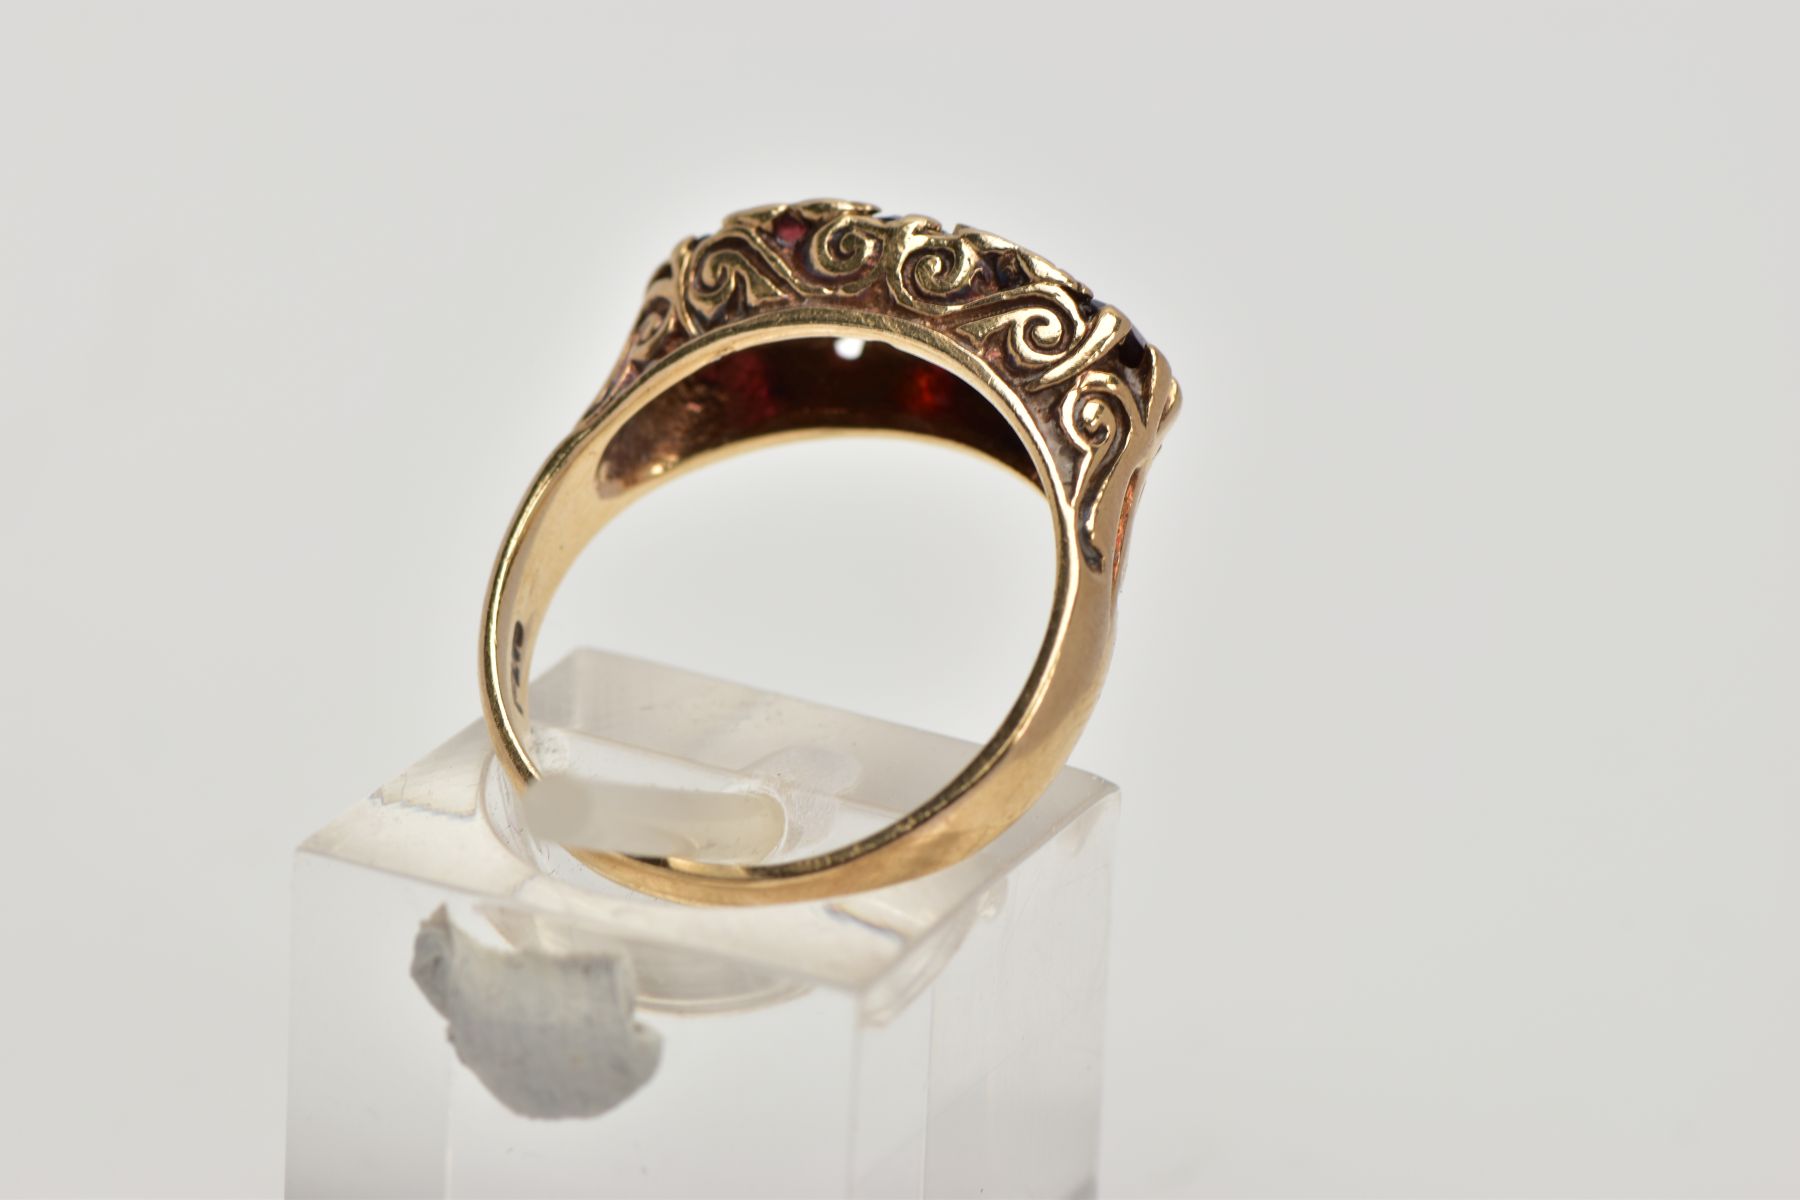 A 9CT GOLD THREE STONE GARNET RING, designed with a row of three graduated oval cut garnets, - Image 3 of 4